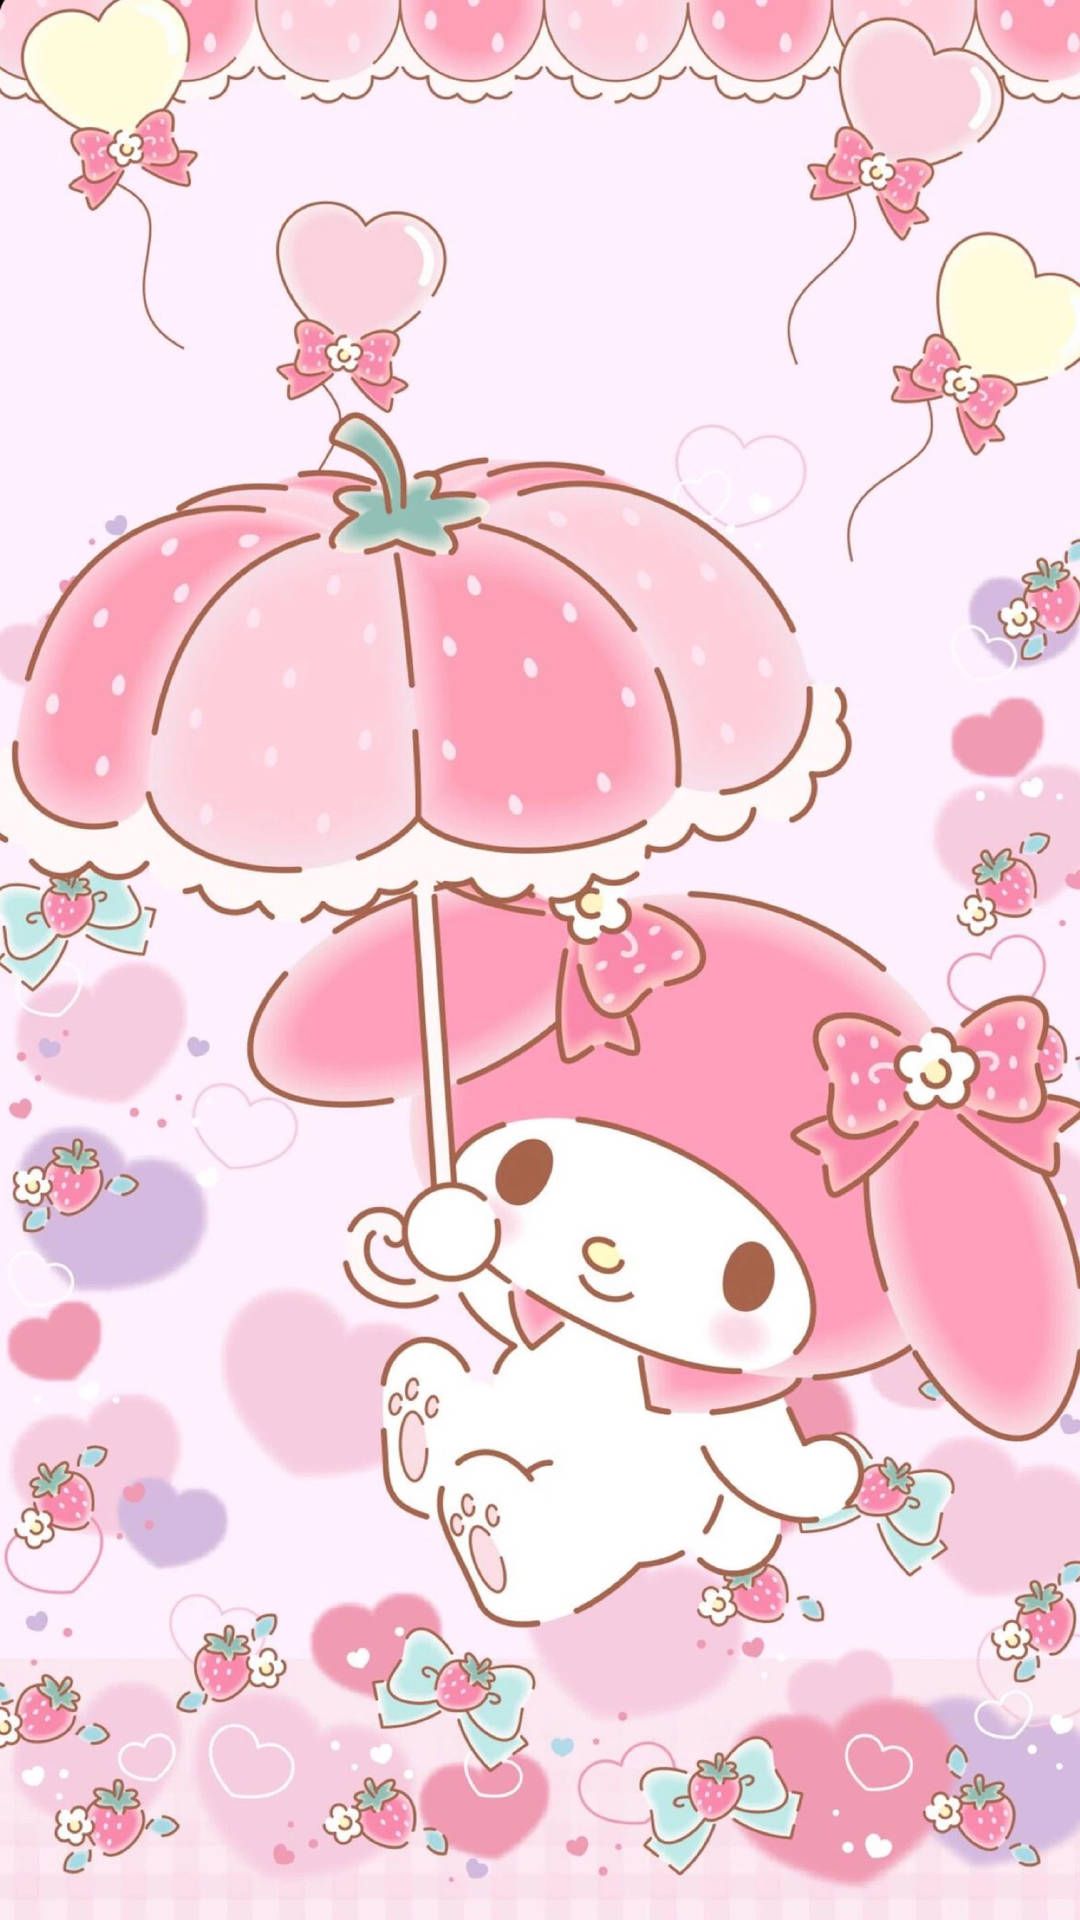 Cute My Melody iPhone Wallpaper with high-resolution 1080x1920 pixel. You can use this wallpaper for your iPhone 5, 6, 7, 8, X, XS, XR backgrounds, Mobile Screensaver, or iPad Lock Screen - My Melody